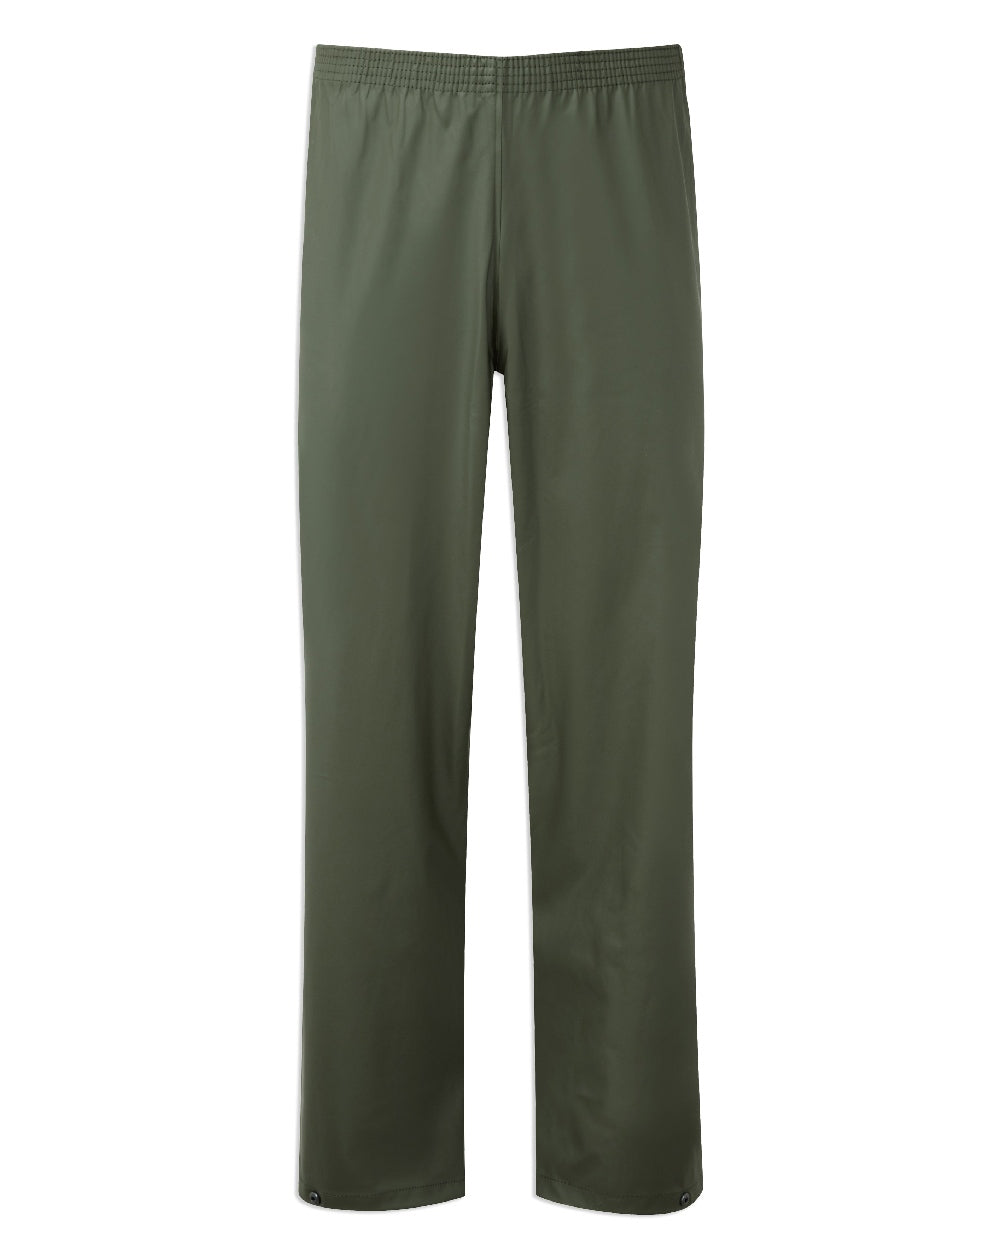 Olive Coloured Fort Airflex Waterproof Breathable Trousers On A White Background 